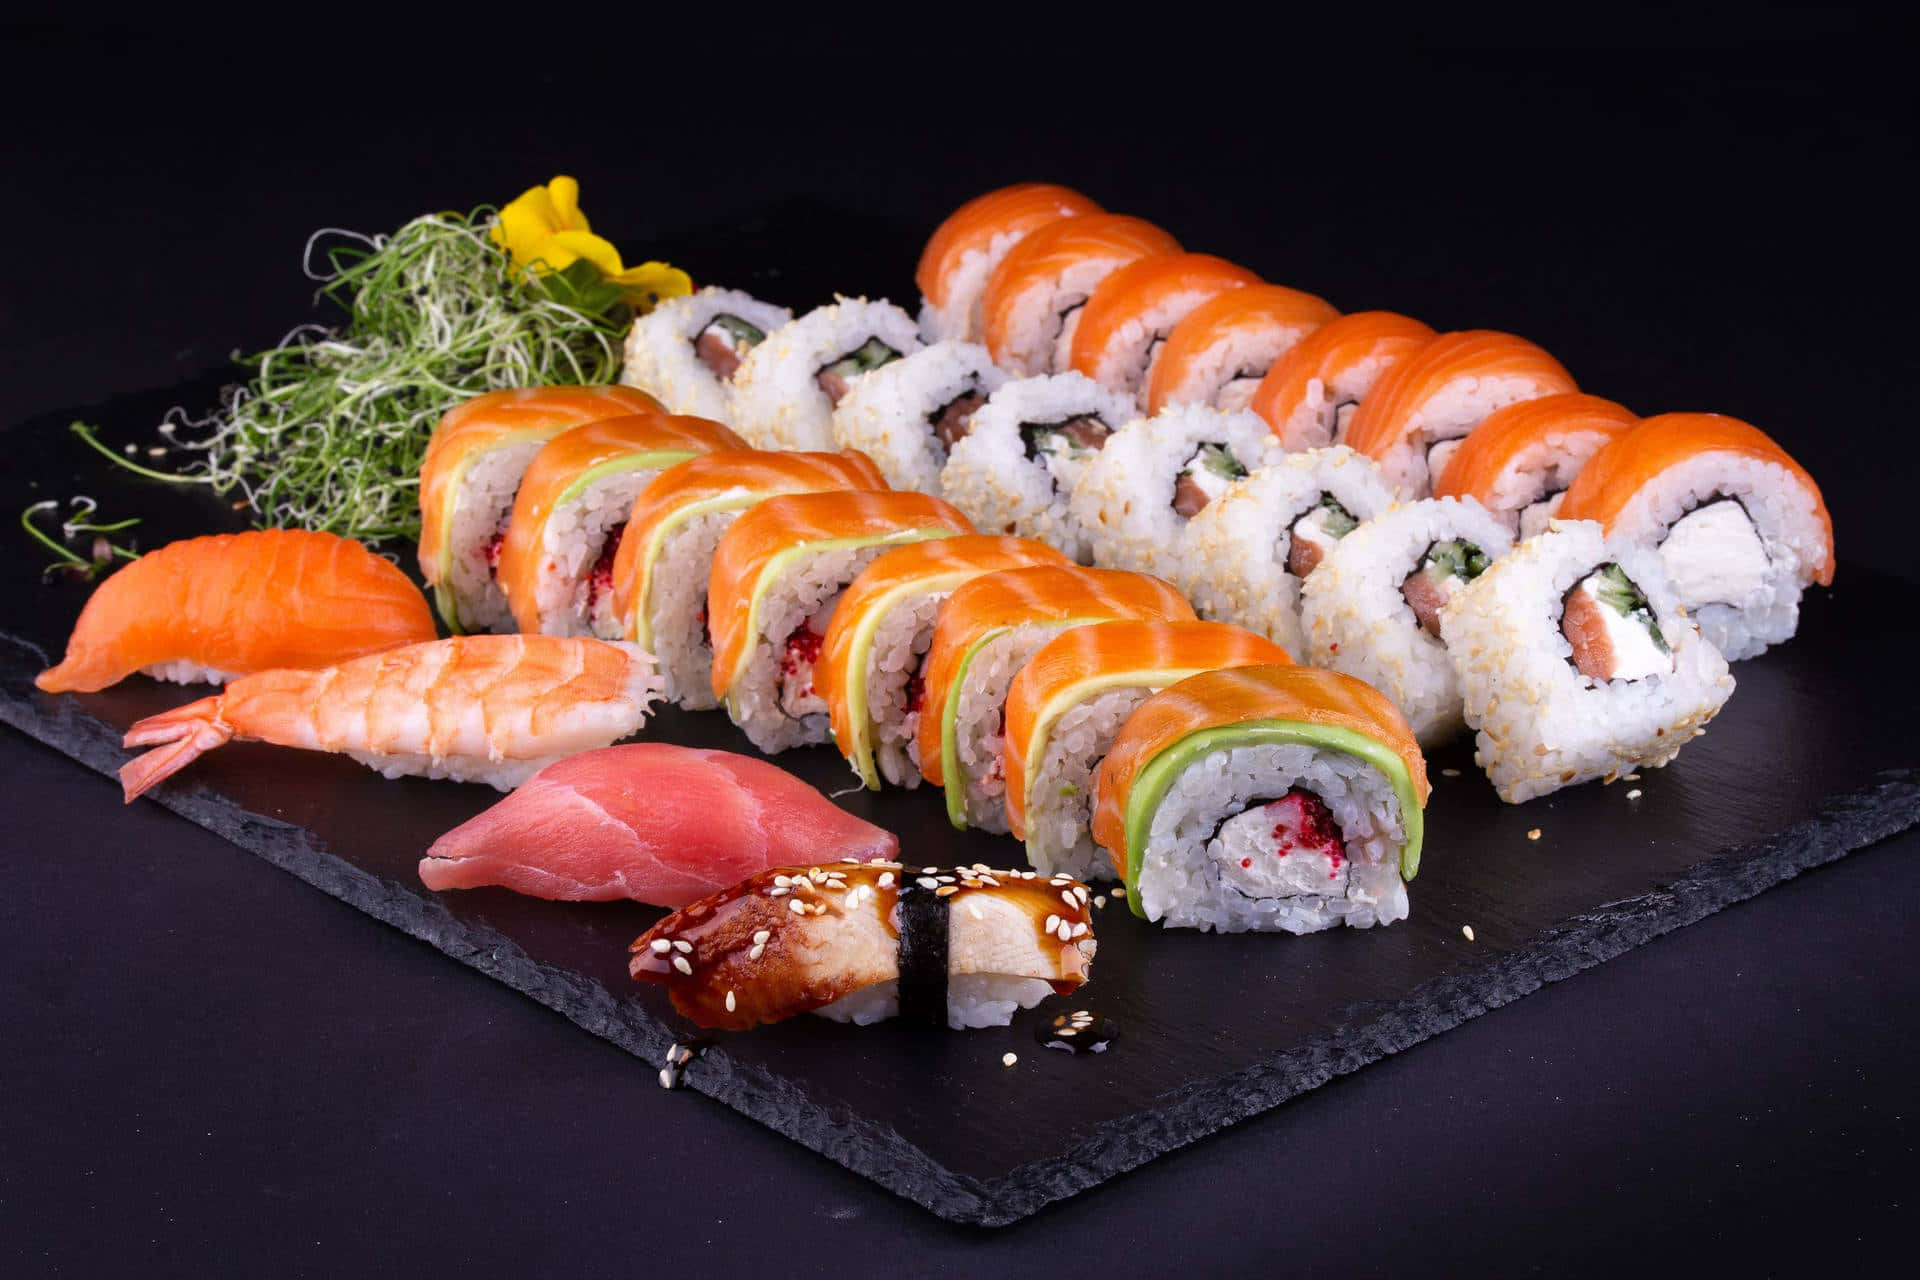 A delicious variety of sushi rolls beautifully arranged on a plate